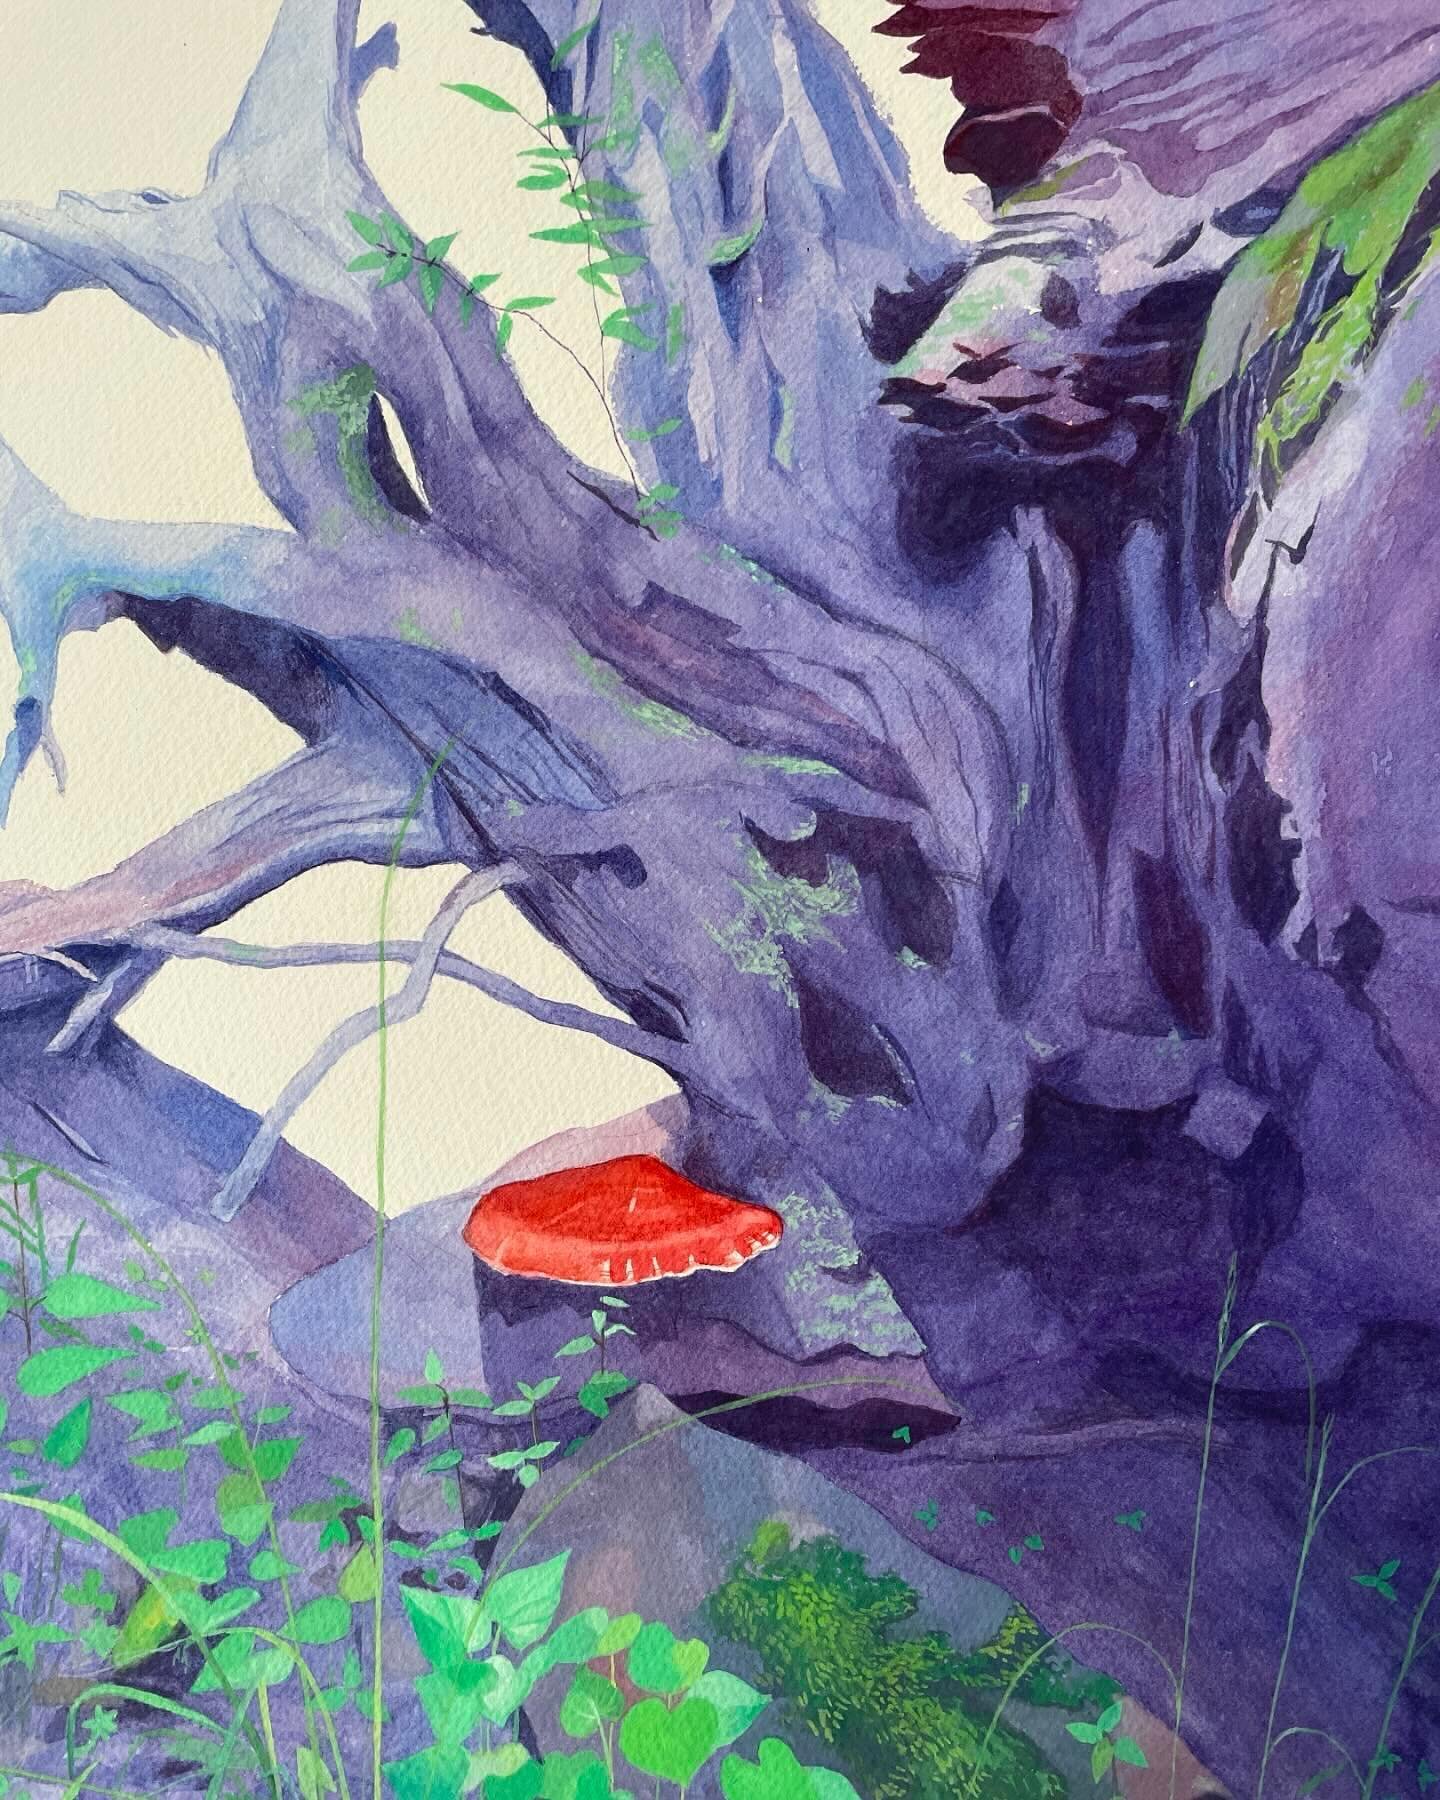 The painting isn&rsquo;t done, but it&rsquo;ll be a moment until I can work on it again - so sharing on the grid. 

Gouache over watercolor - a first for me, and an attempt to capture the incredible layering of life over decay I witnessed on the &ldq